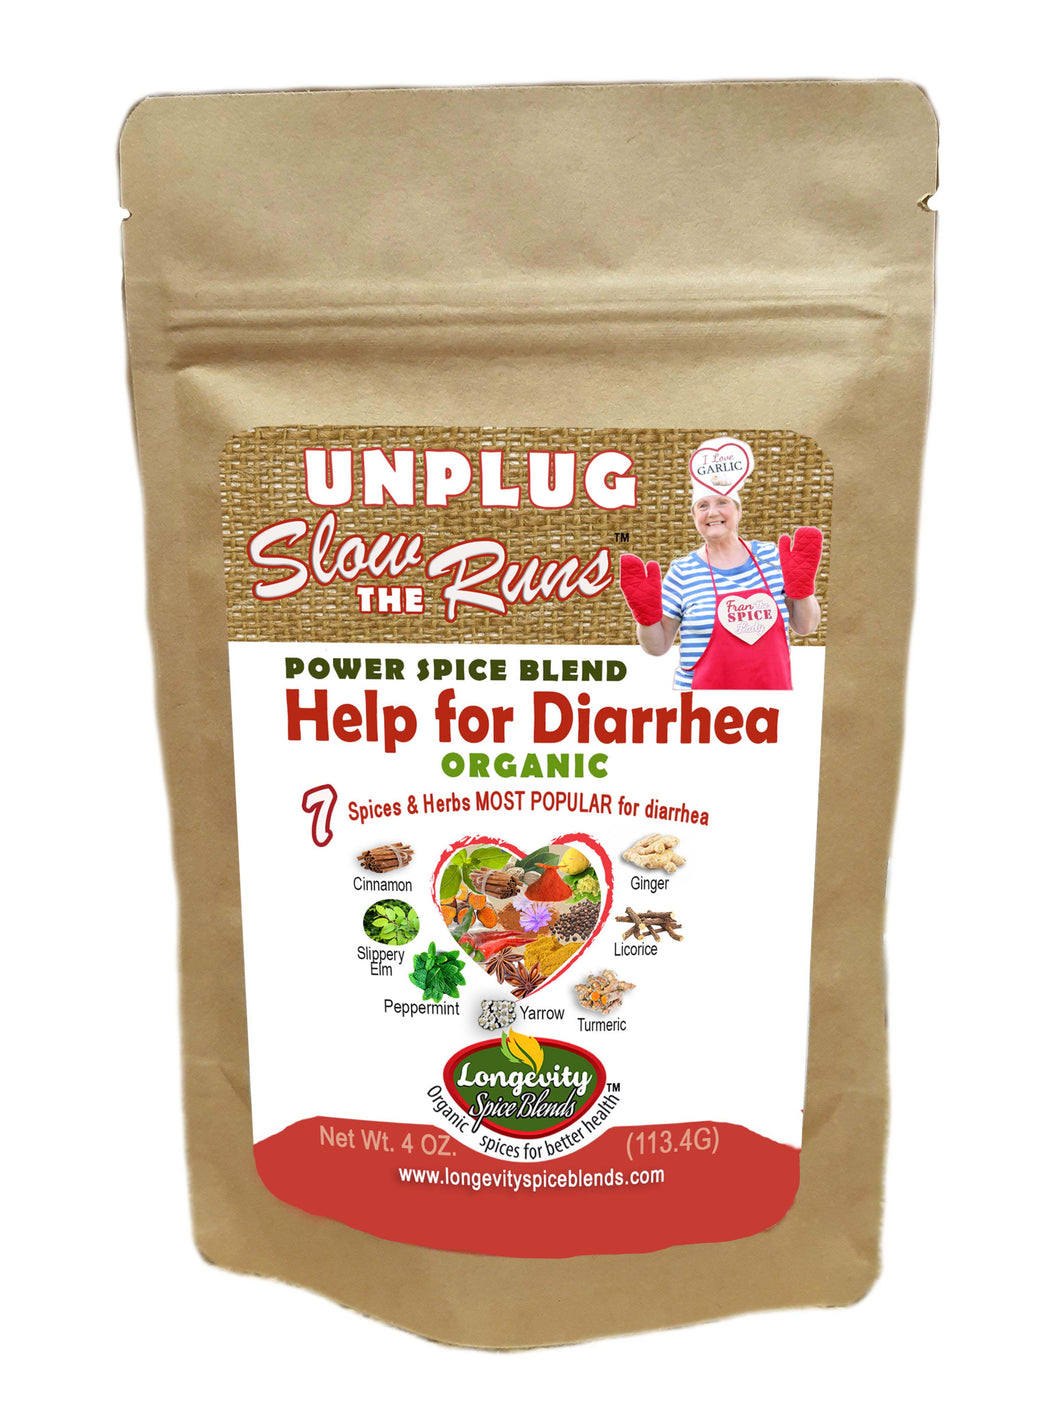 Diarrhea | UNPLUG! Herbal Relief for Consipation and Diarrhea with Diarrhea Spices.